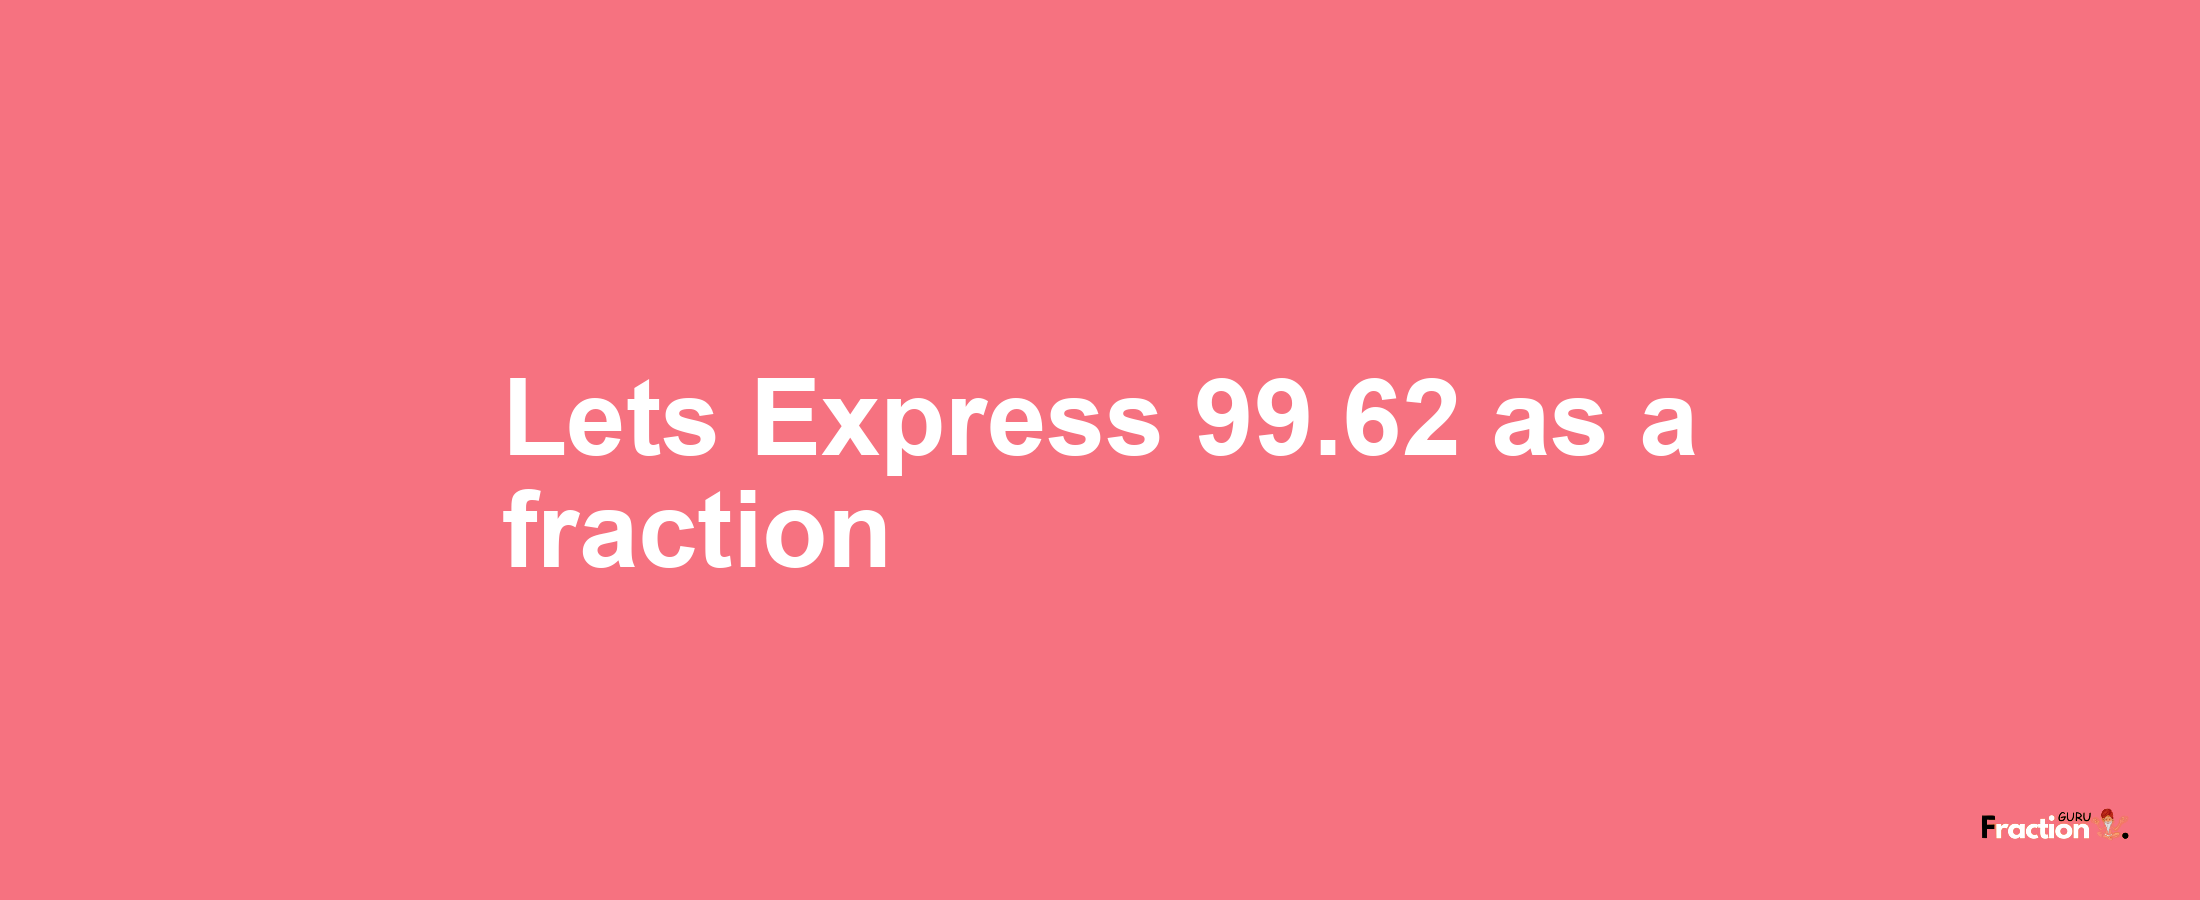 Lets Express 99.62 as afraction